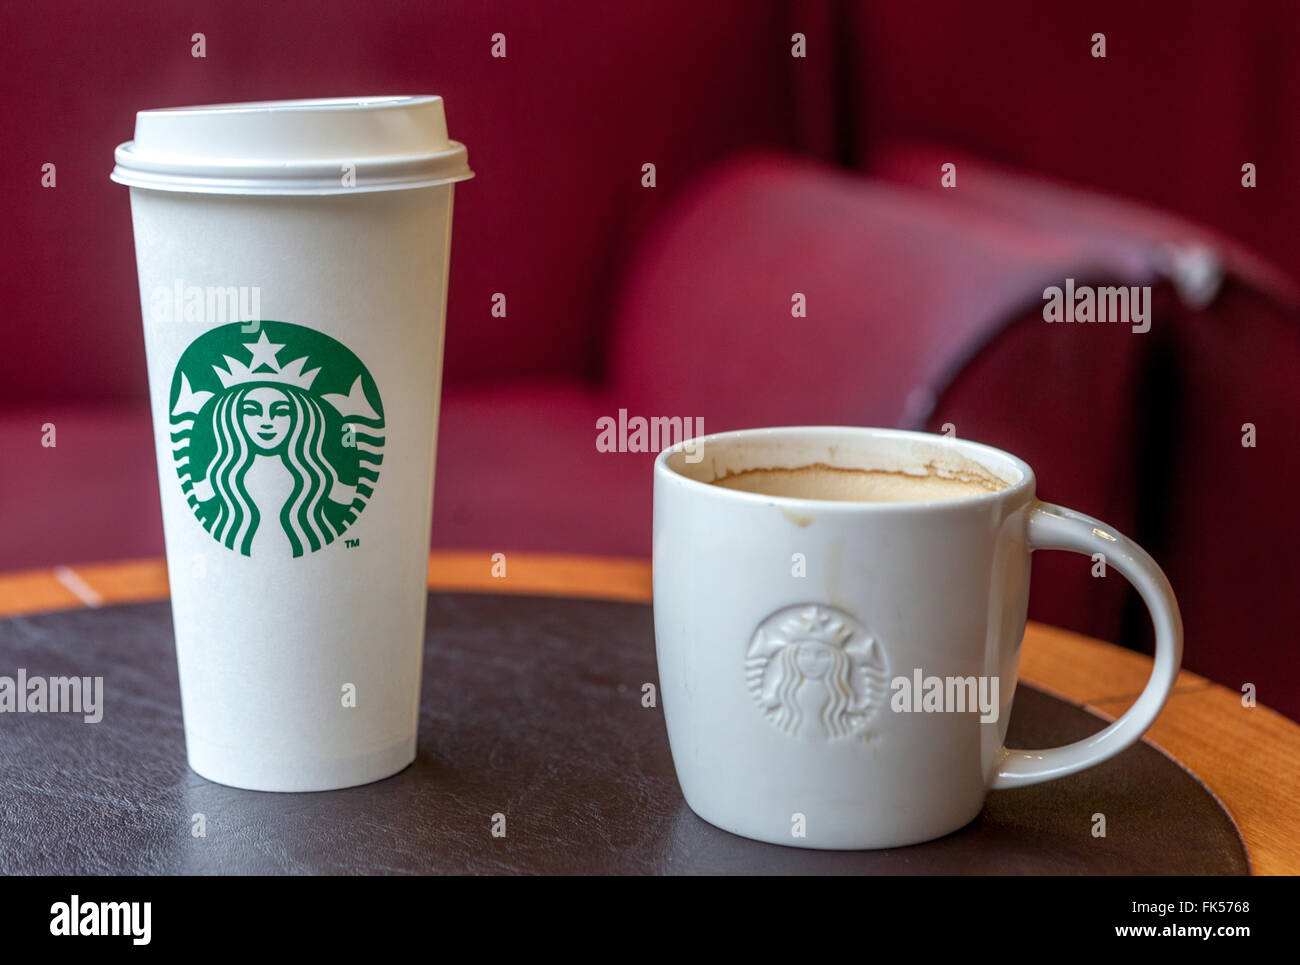 Starbucks coffee cups on a table Stock Photo